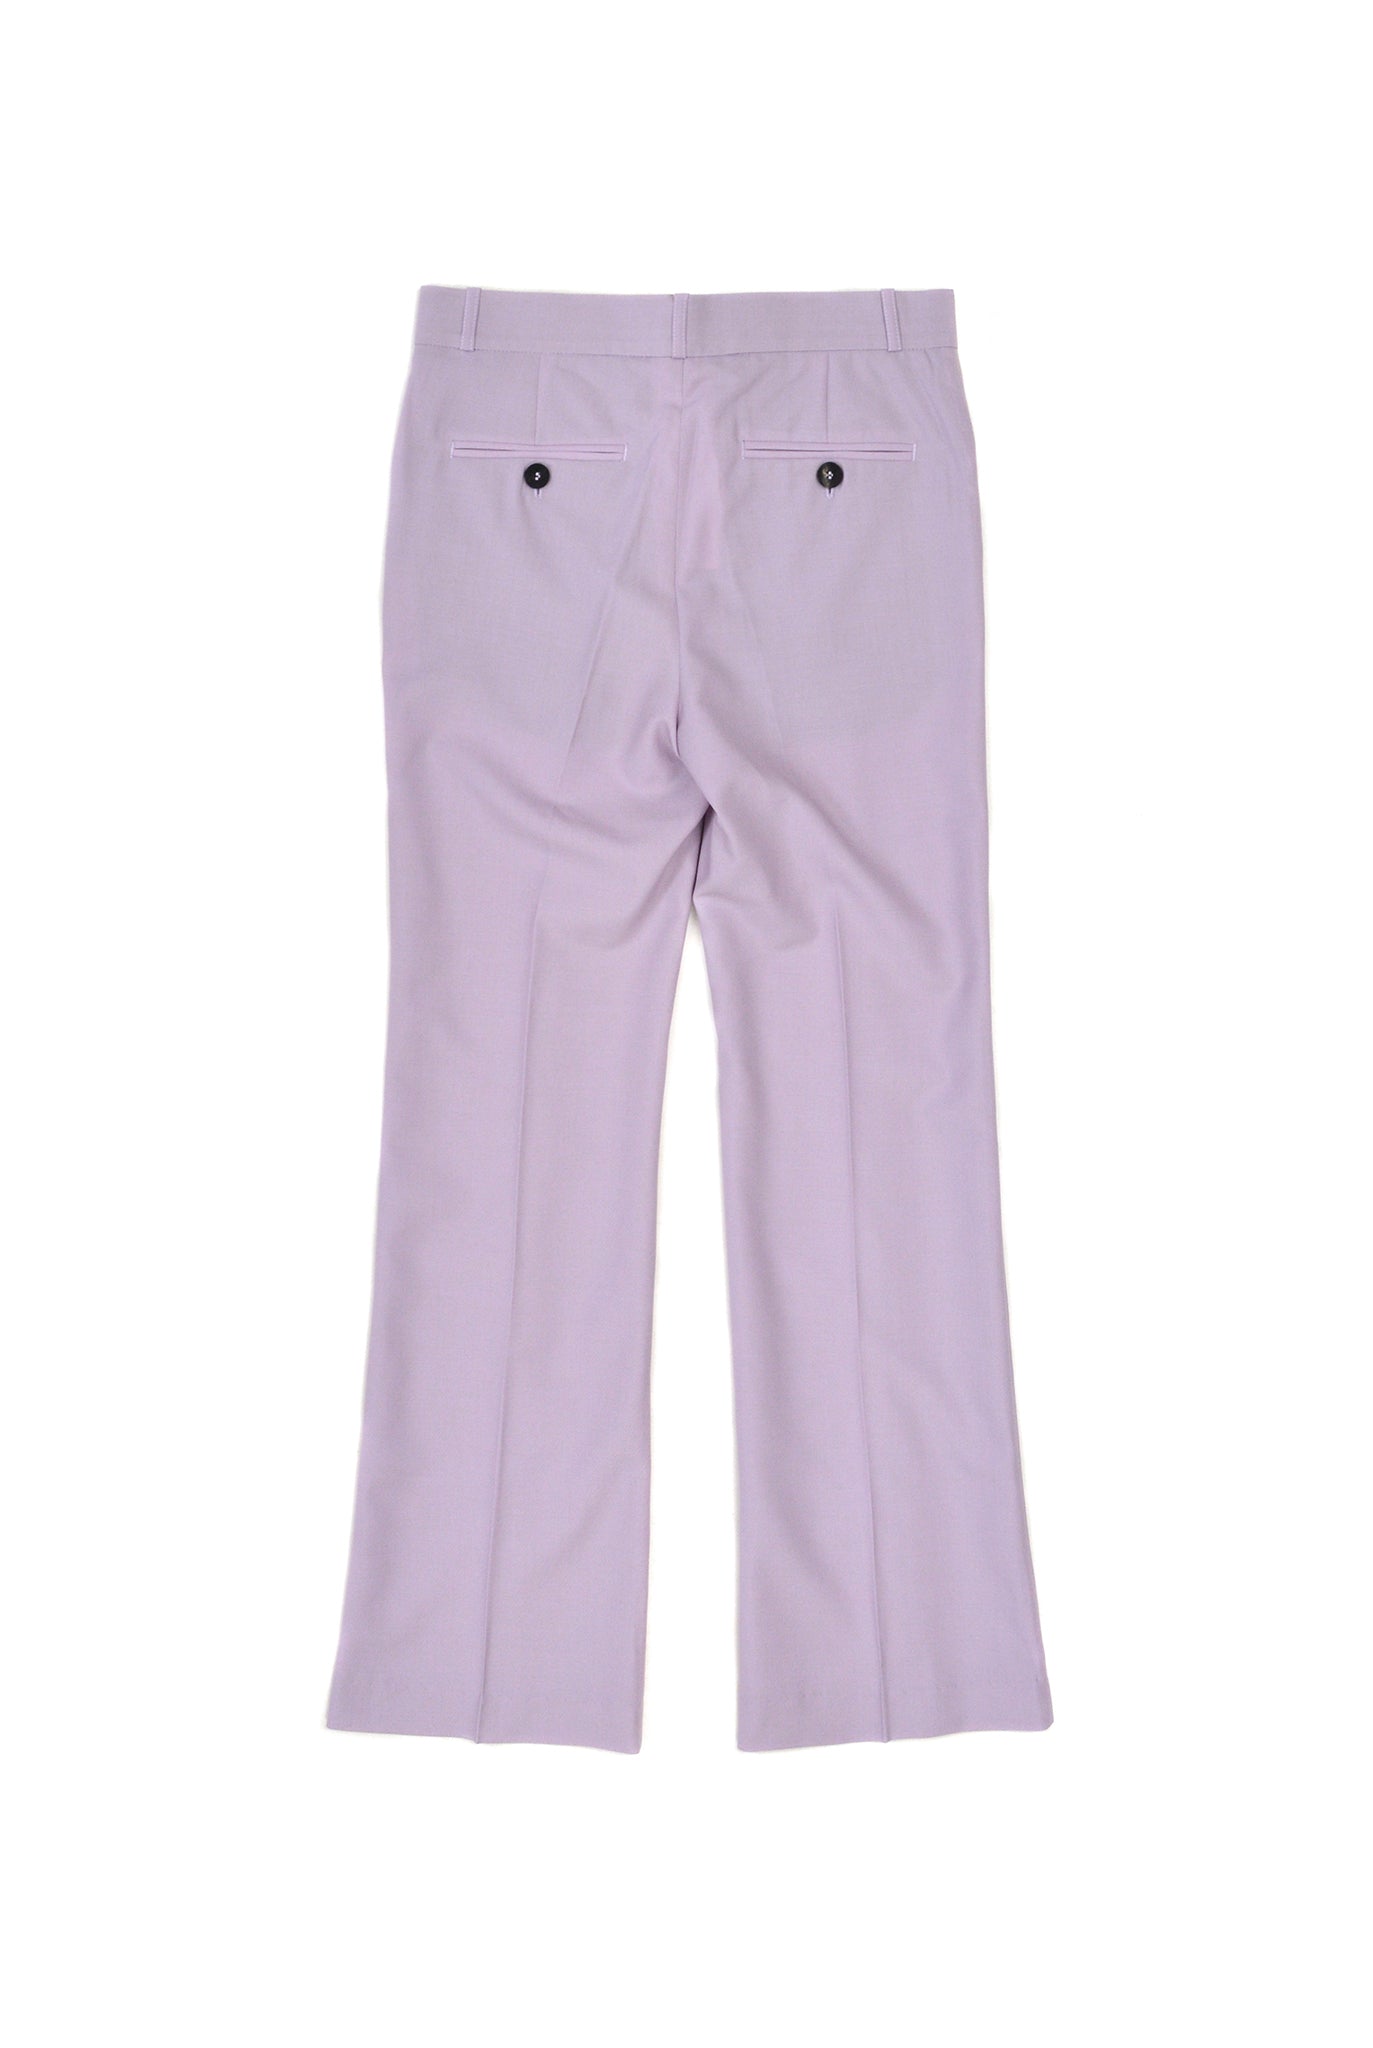 Ernest W. Baker Flared Trousers, Lilac